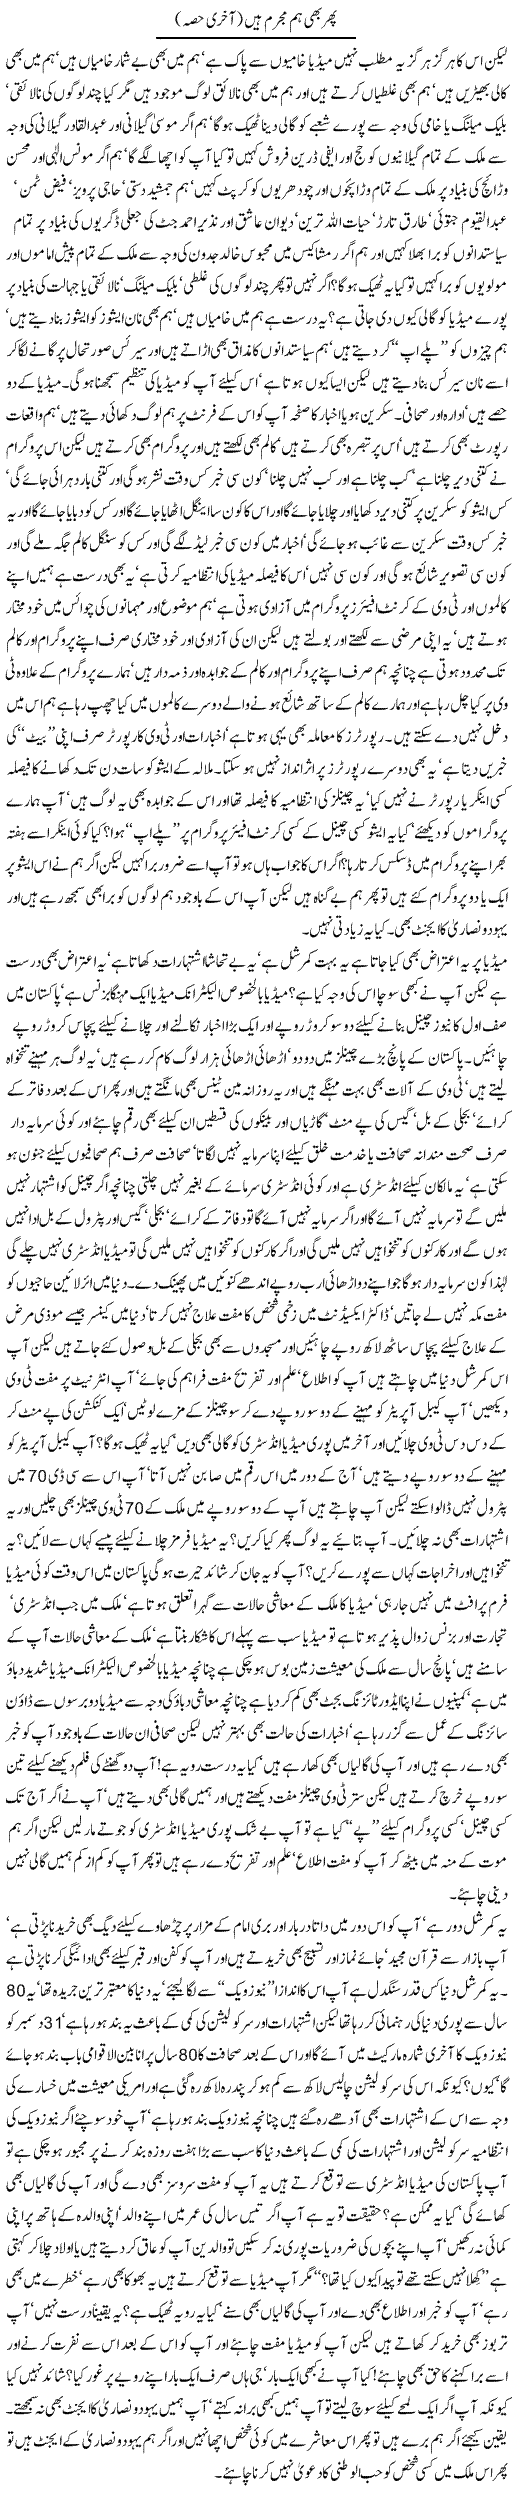 Still We Are Criminals Express Column Javed Chaudhry 21 October 2012